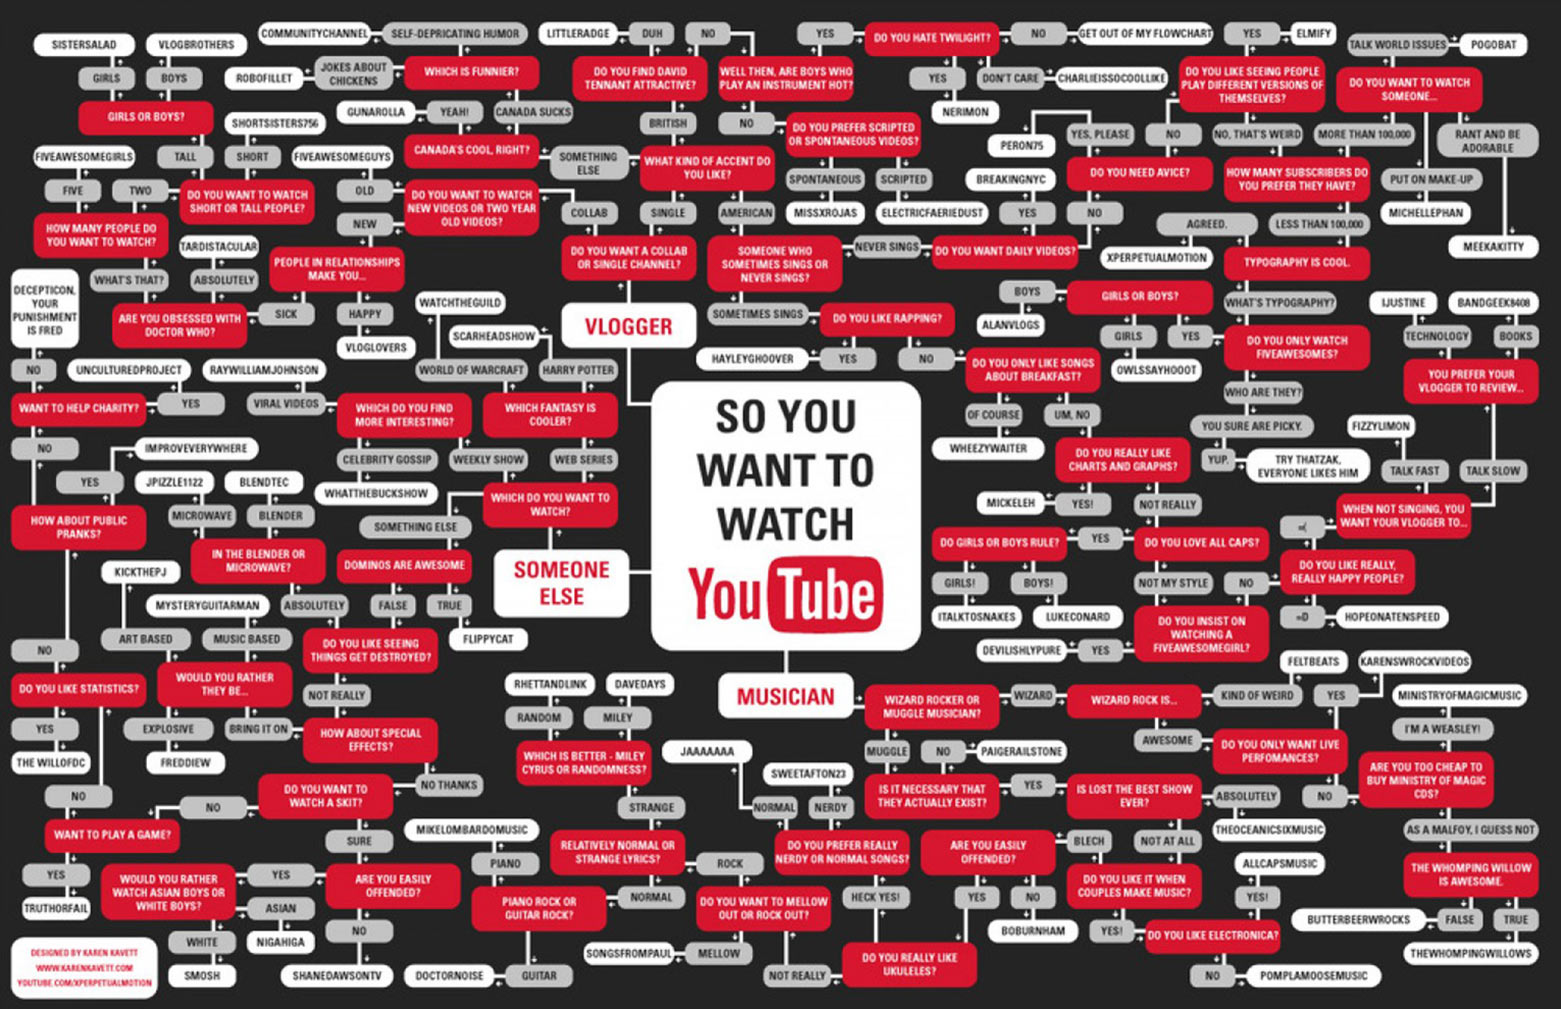 So You Want To Watch Youtube [Flowchart]